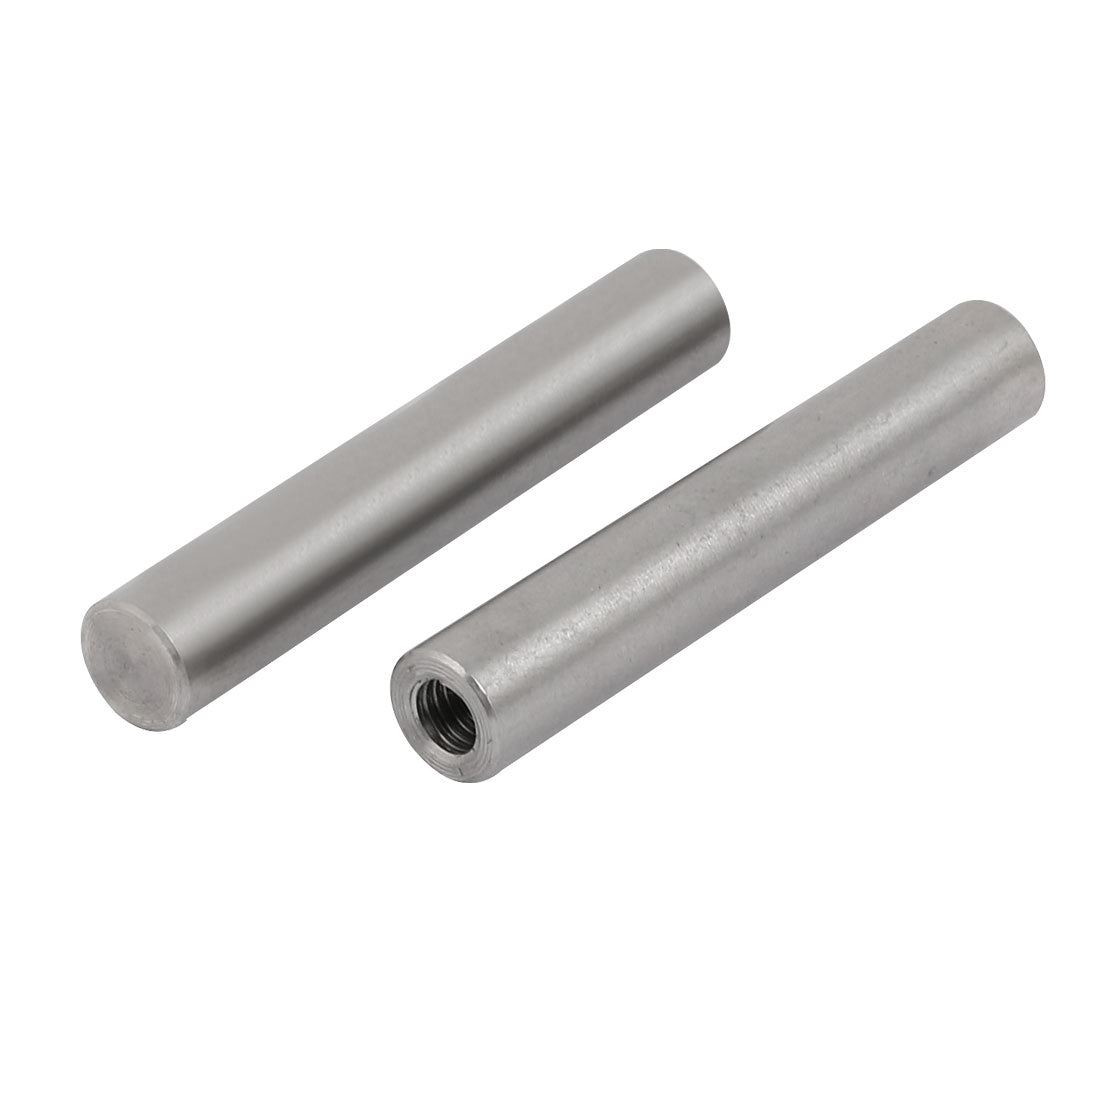 uxcell Uxcell 304 Stainless Steel M6 Female Thread 10mm x 60mm Cylindrical Dowel Pin 2pcs